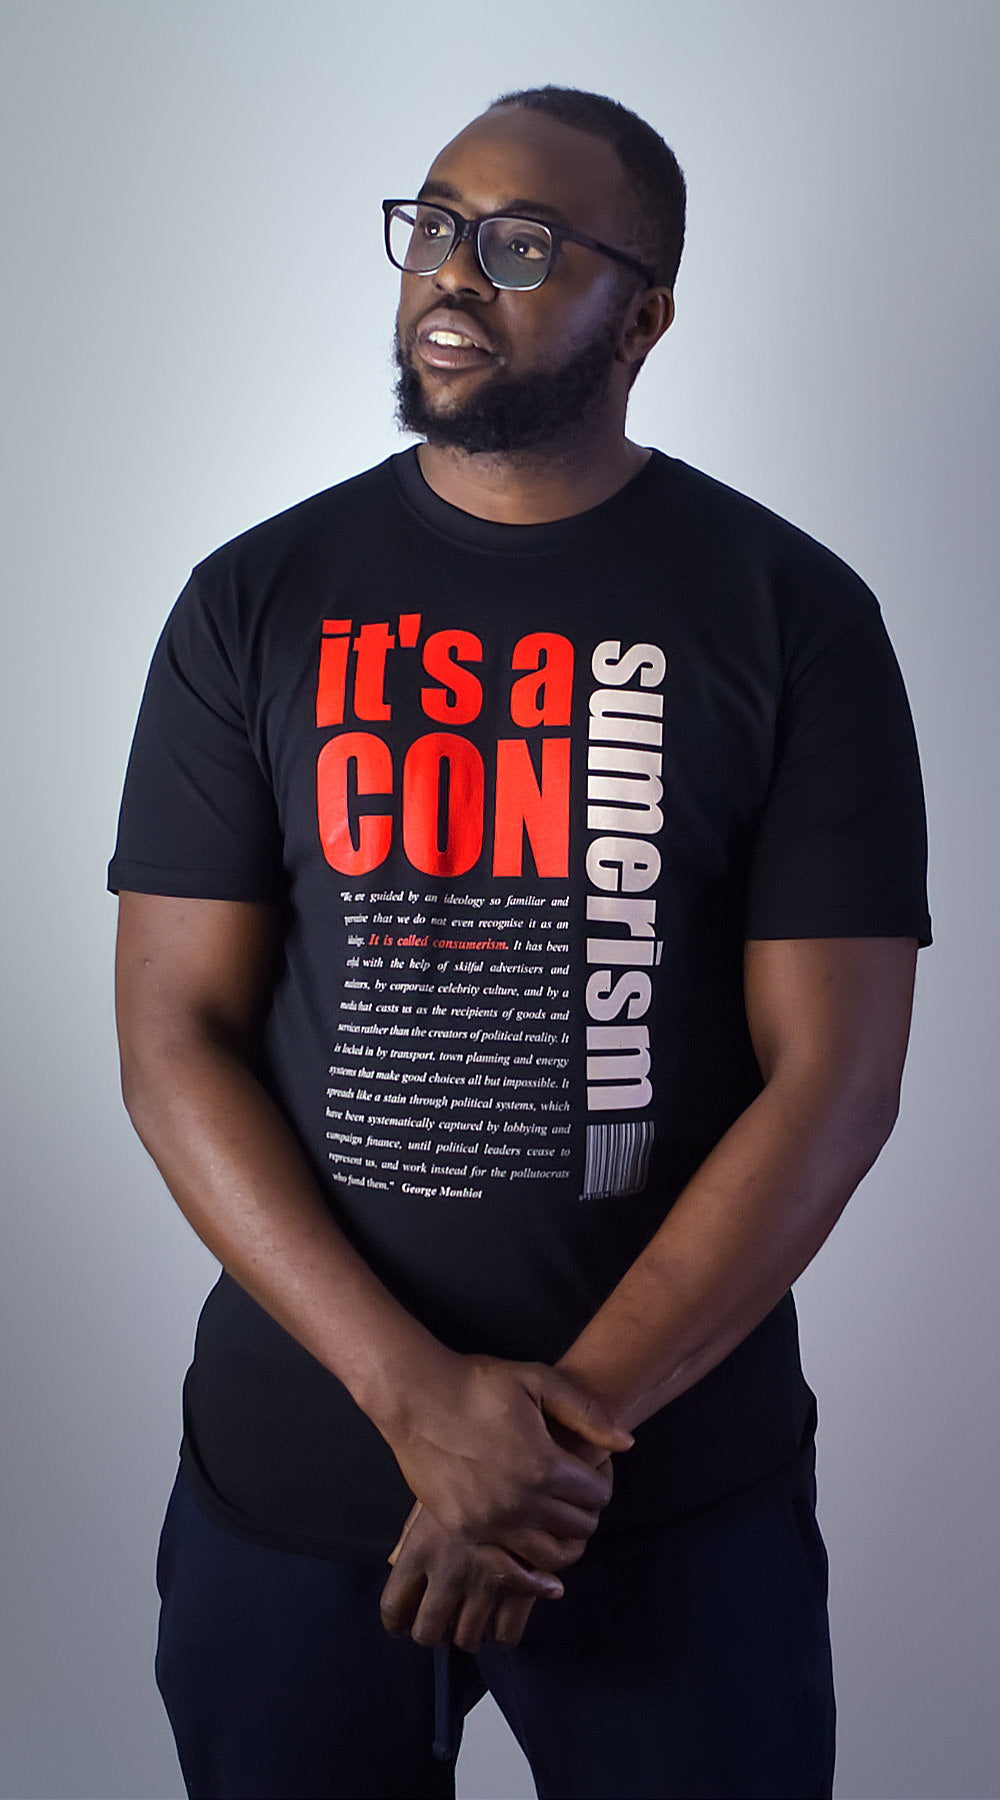 Men's black Art-Shirt 'Consumerism' by Gary McFeat featuring George Monbiot quote, GOTS certified organic cotton